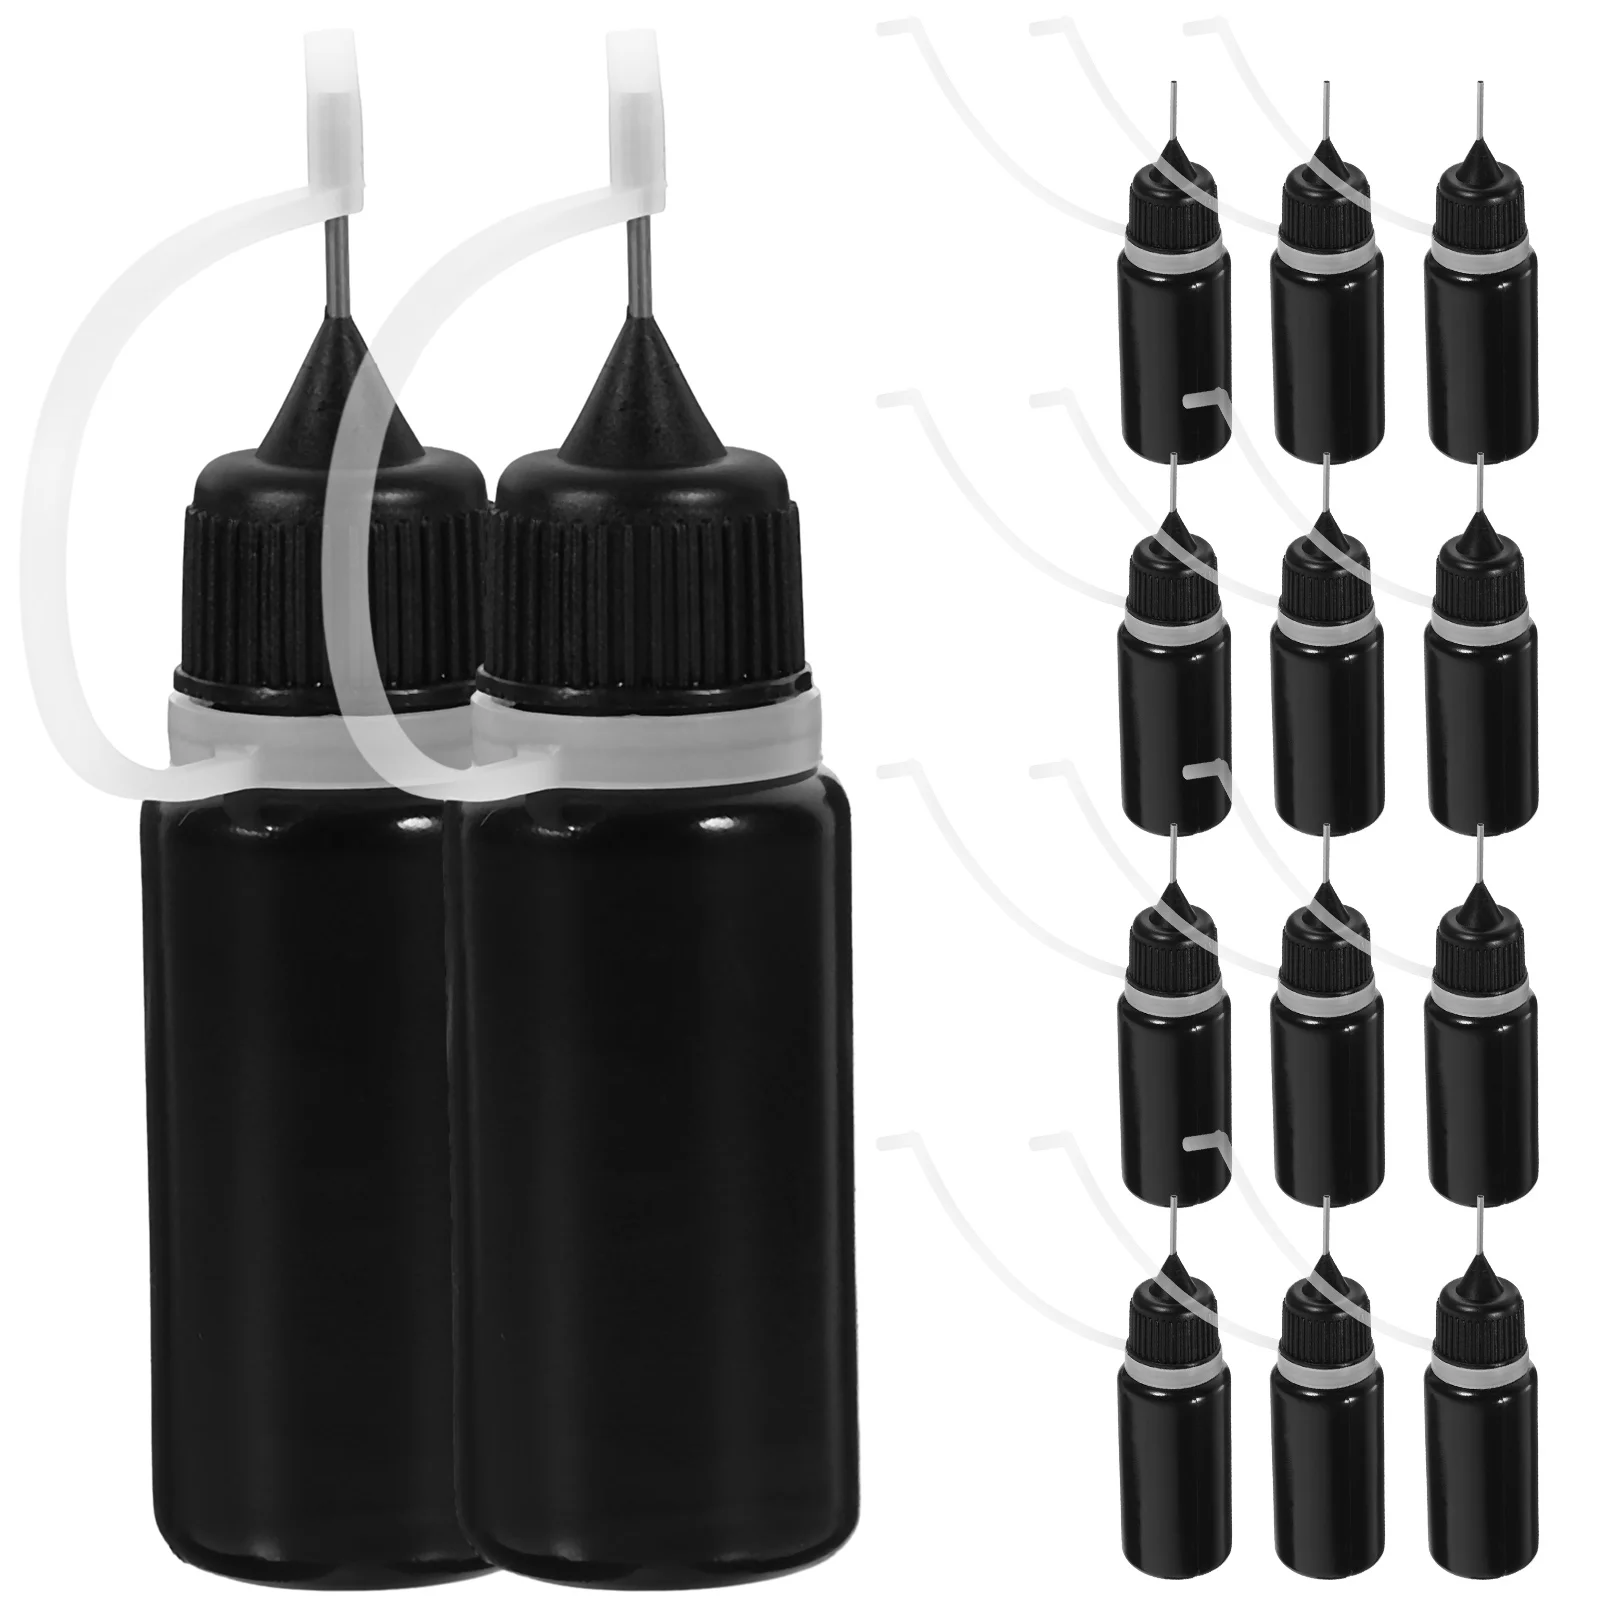 20 Pcs Bottled Squeeze Bottles Glue with Fine Tip for Liquids Needle Small Stainless Steel Precision Applicator Dispenser